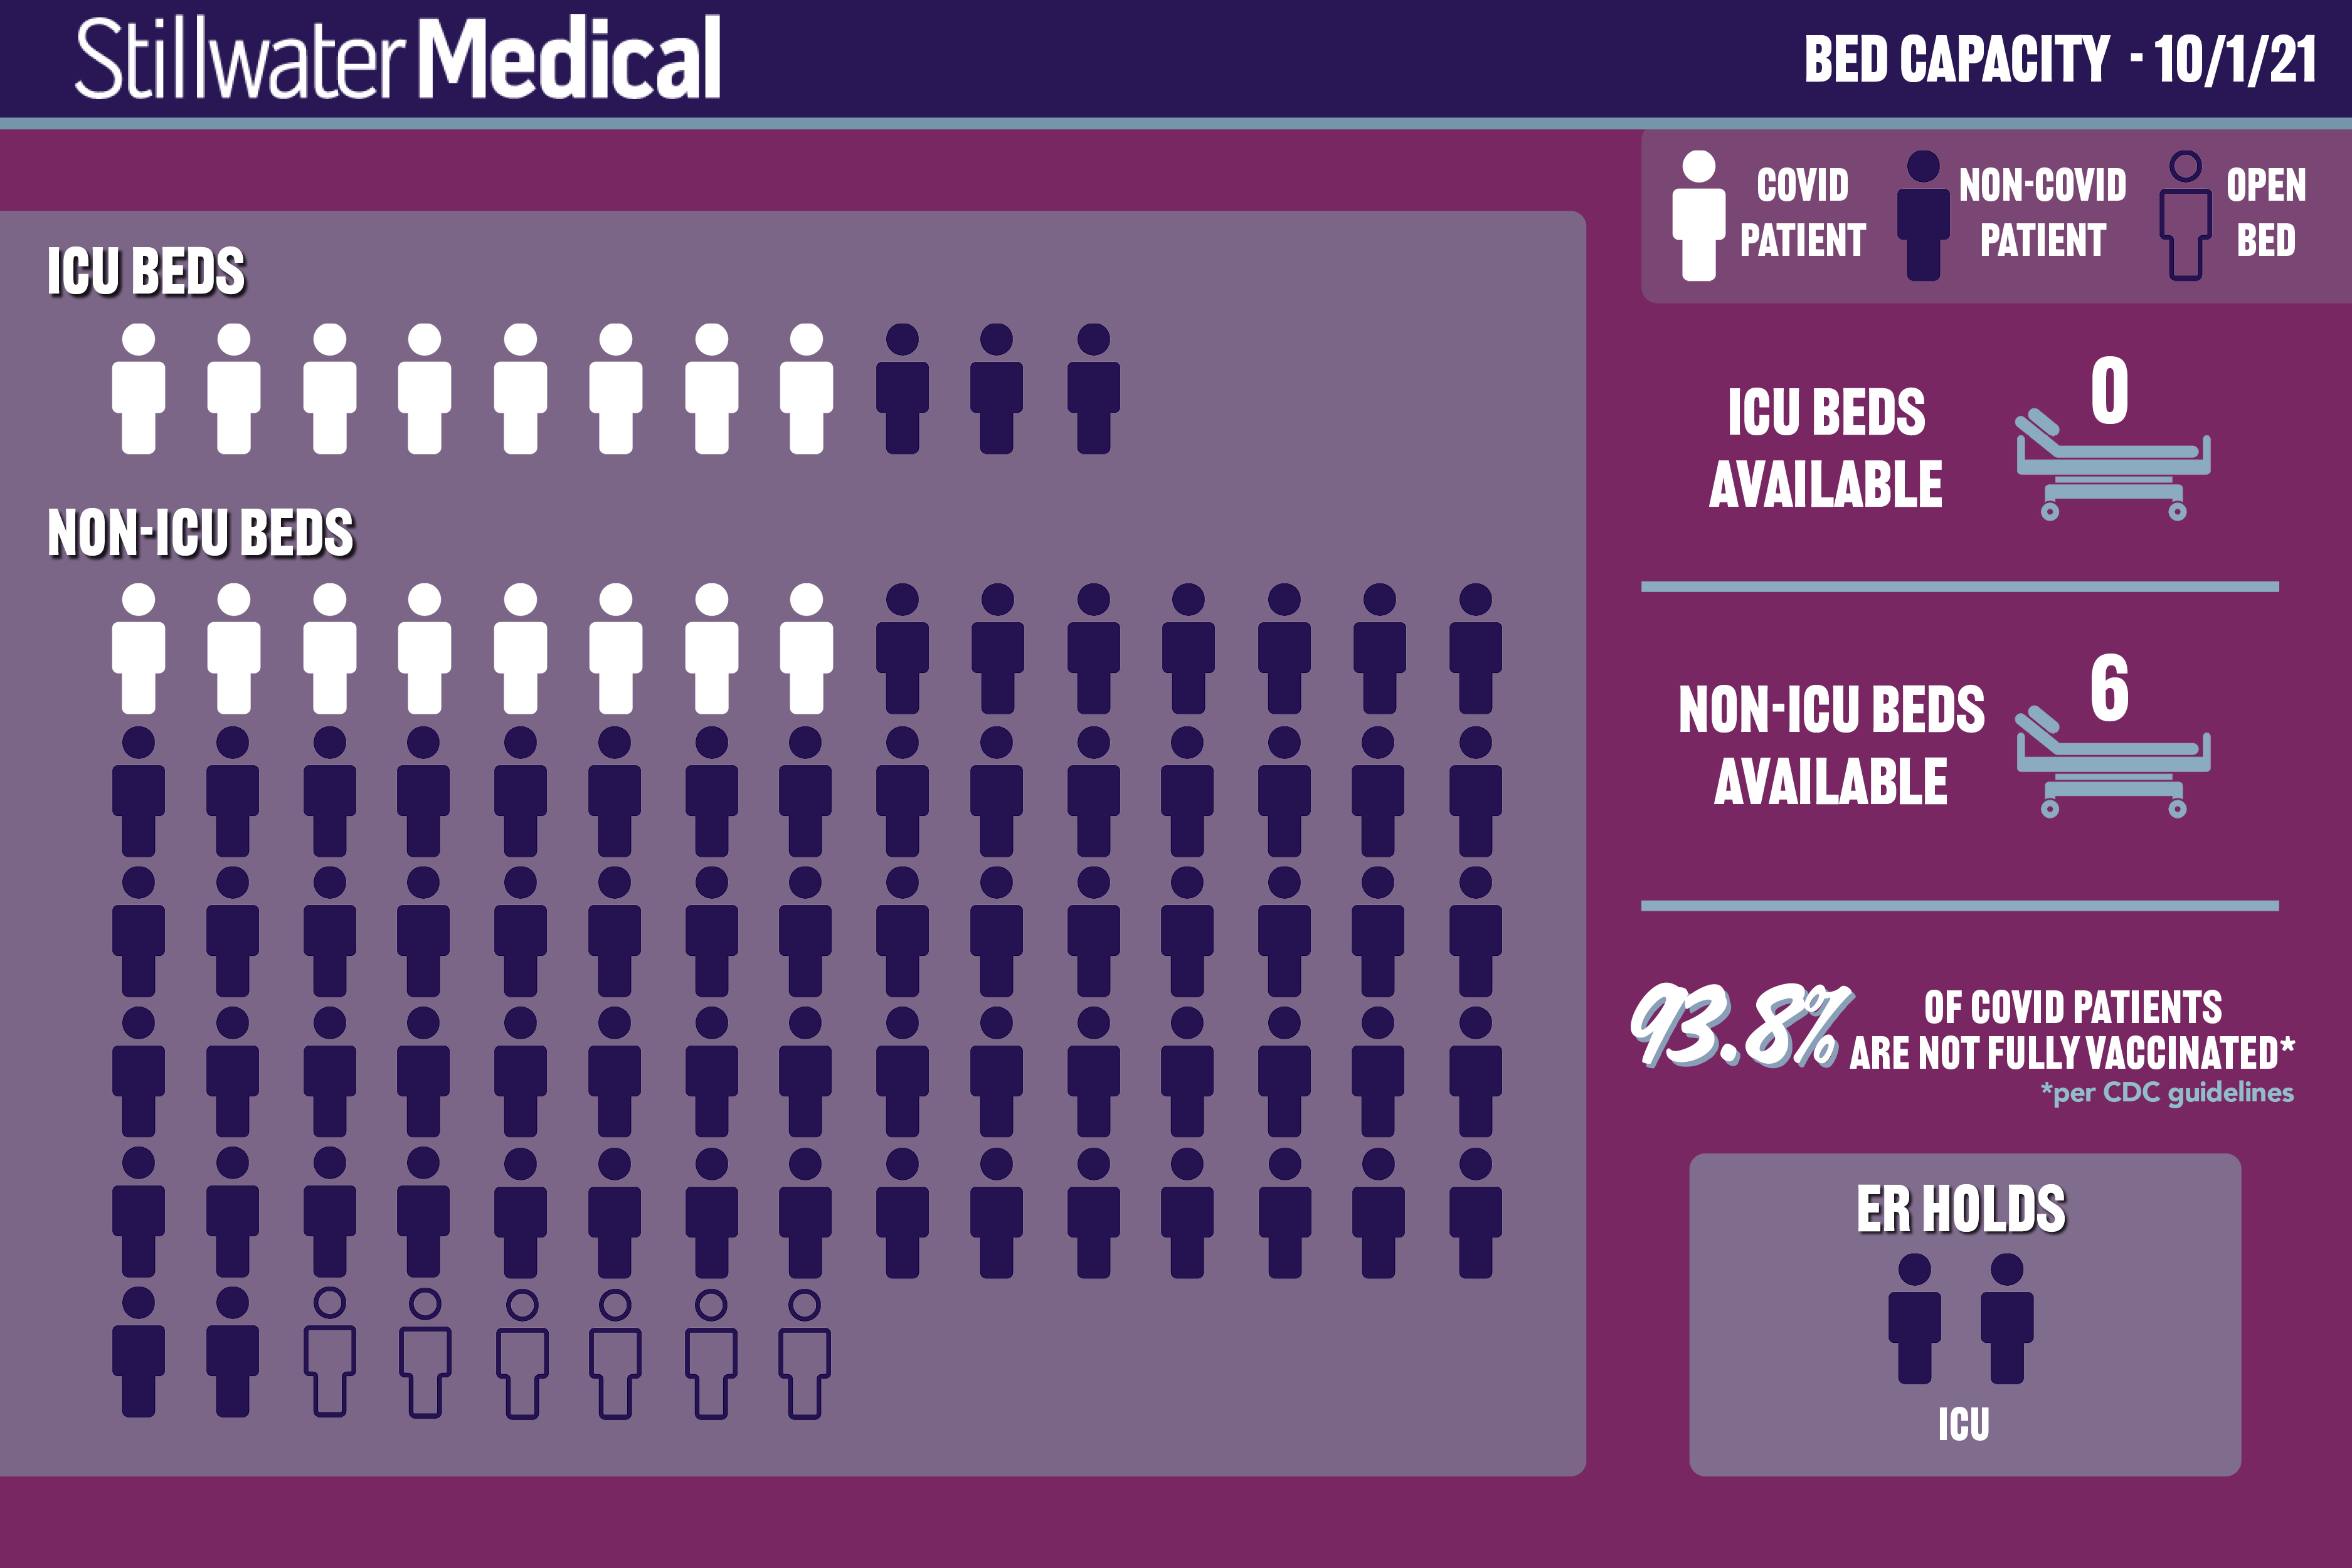 Stillwater Medical Bed Capacity graphic shows zero ICU beds open, with 8/11 patients having Covid, and it shows 6 Non-ICU beds open, with 8/77 patients having Covid. There are 2 ER holds for the ICU who are non-Covid patients. 